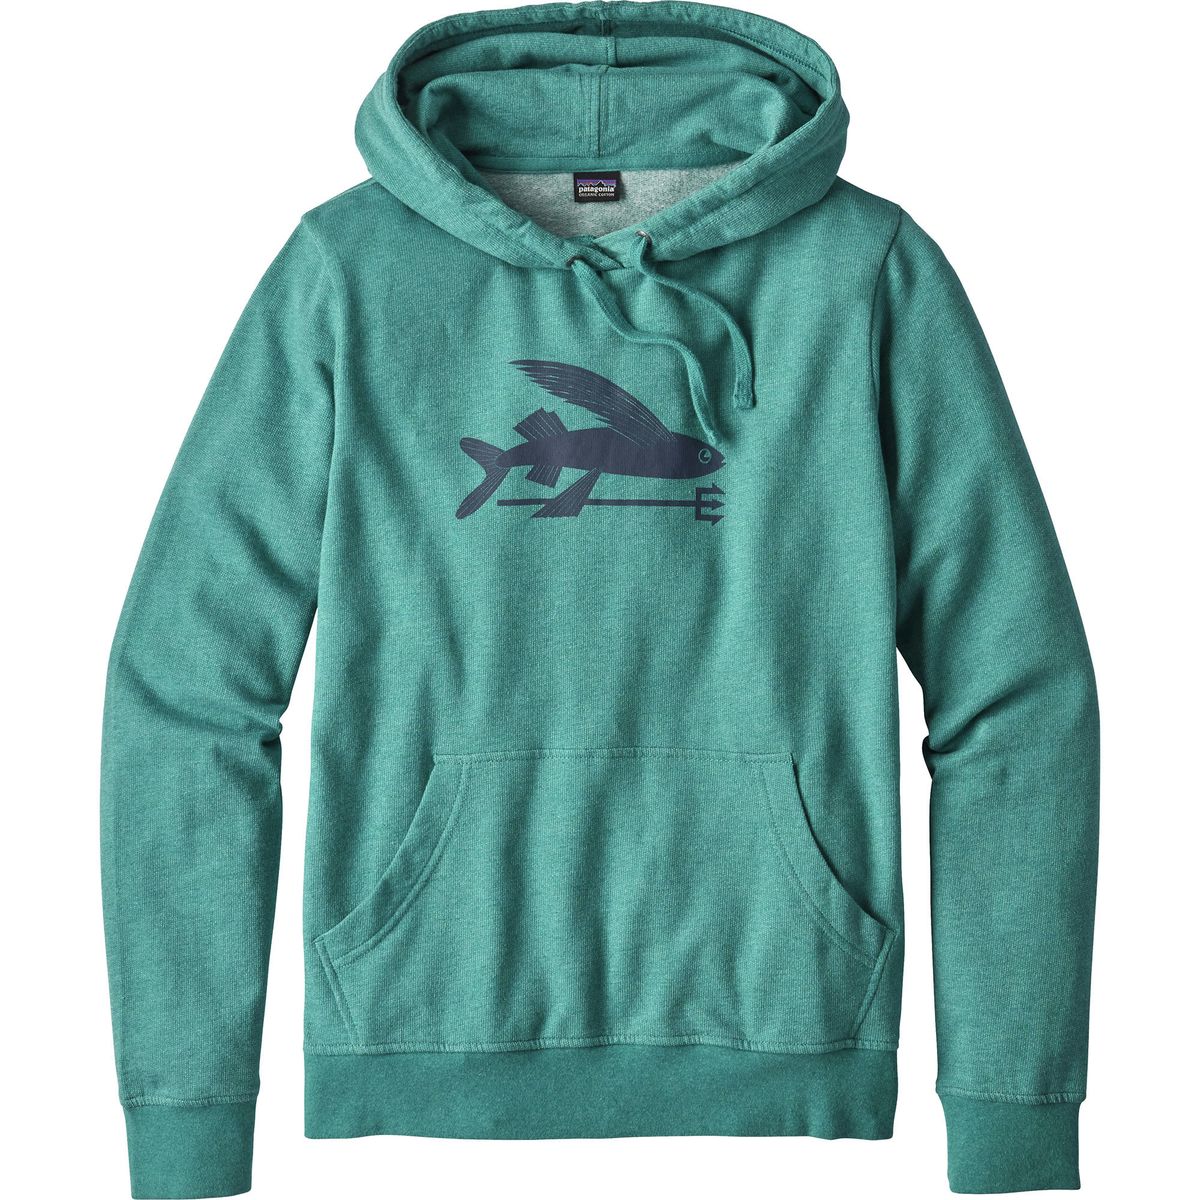 Patagonia Flying Fish Lightweight Pullover Hoodie - Women's - Clothing